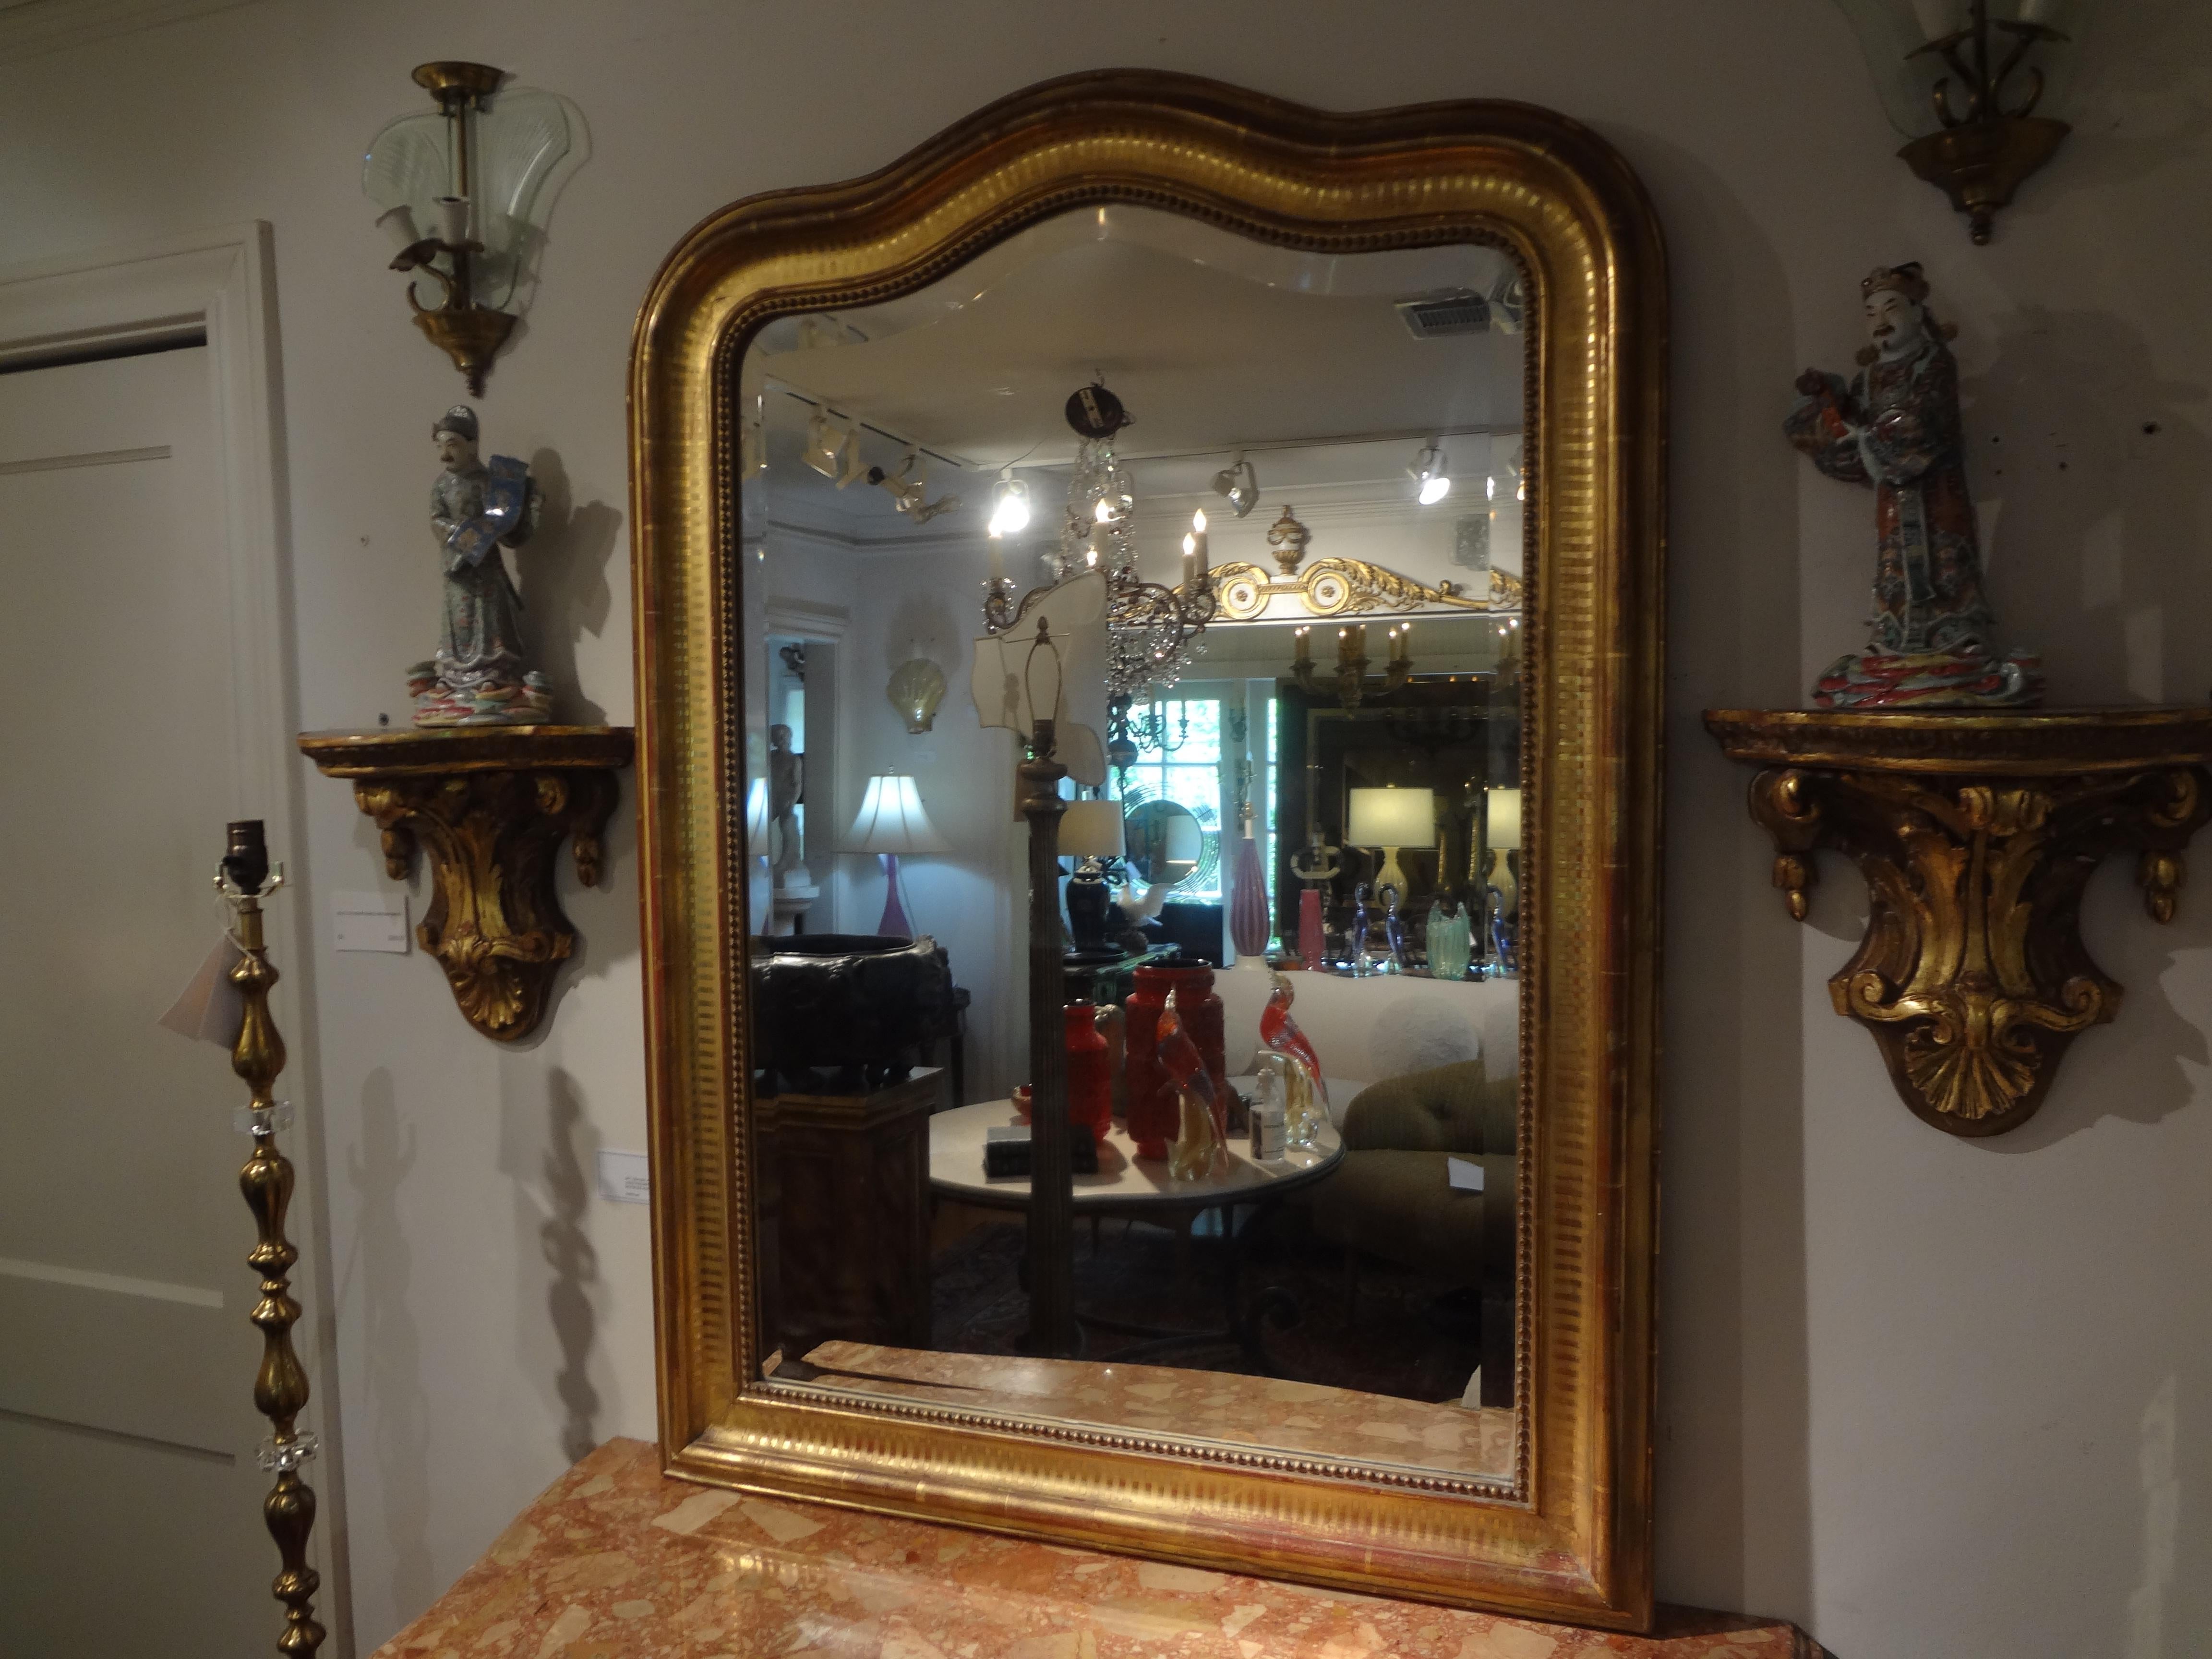 Stunning 19th century French Louis Philippe giltwood beveled mirror. This shapely antique Venetian mirror has a beautifully decorated engraved design around the perimeter and would look great in an entrance hall, a powder room, above a console,